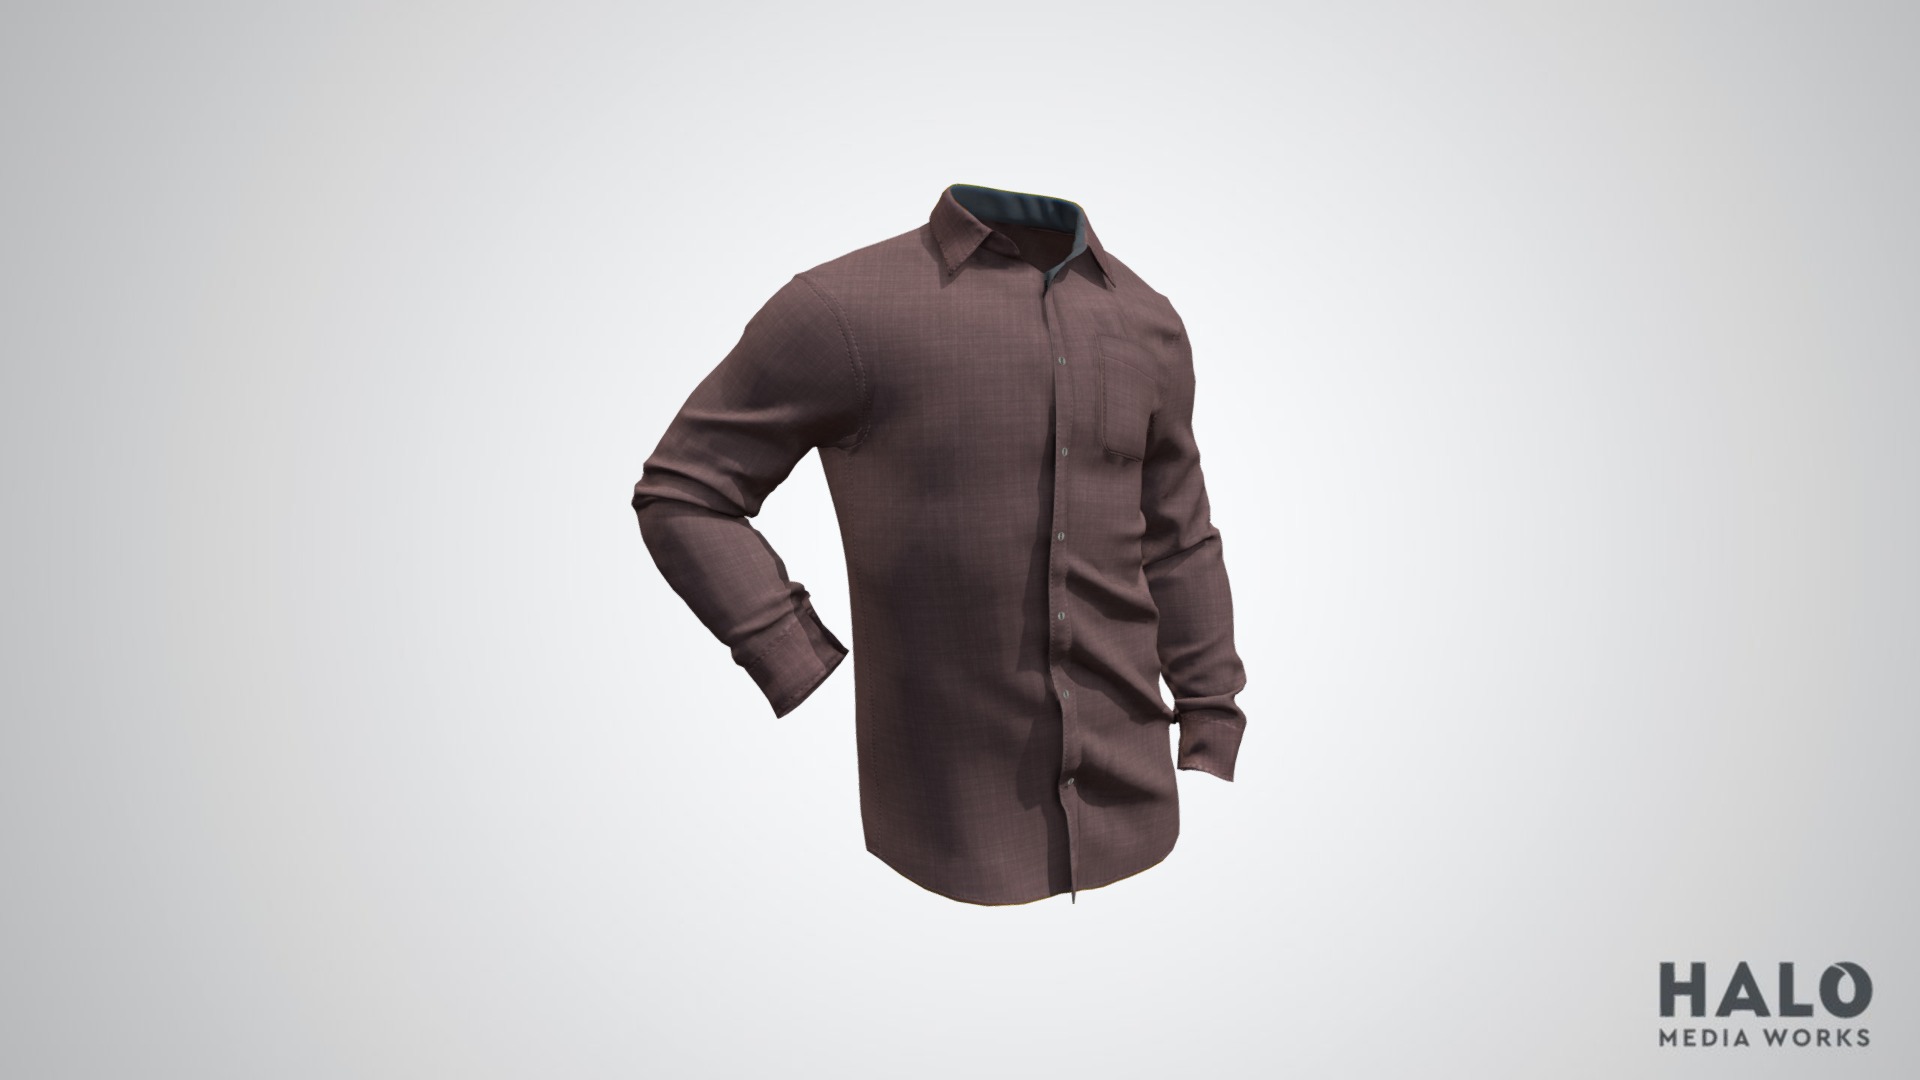 3D model Button Down Shirt - This is a 3D model of the Button Down Shirt. The 3D model is about a brown jacket with a black strap.